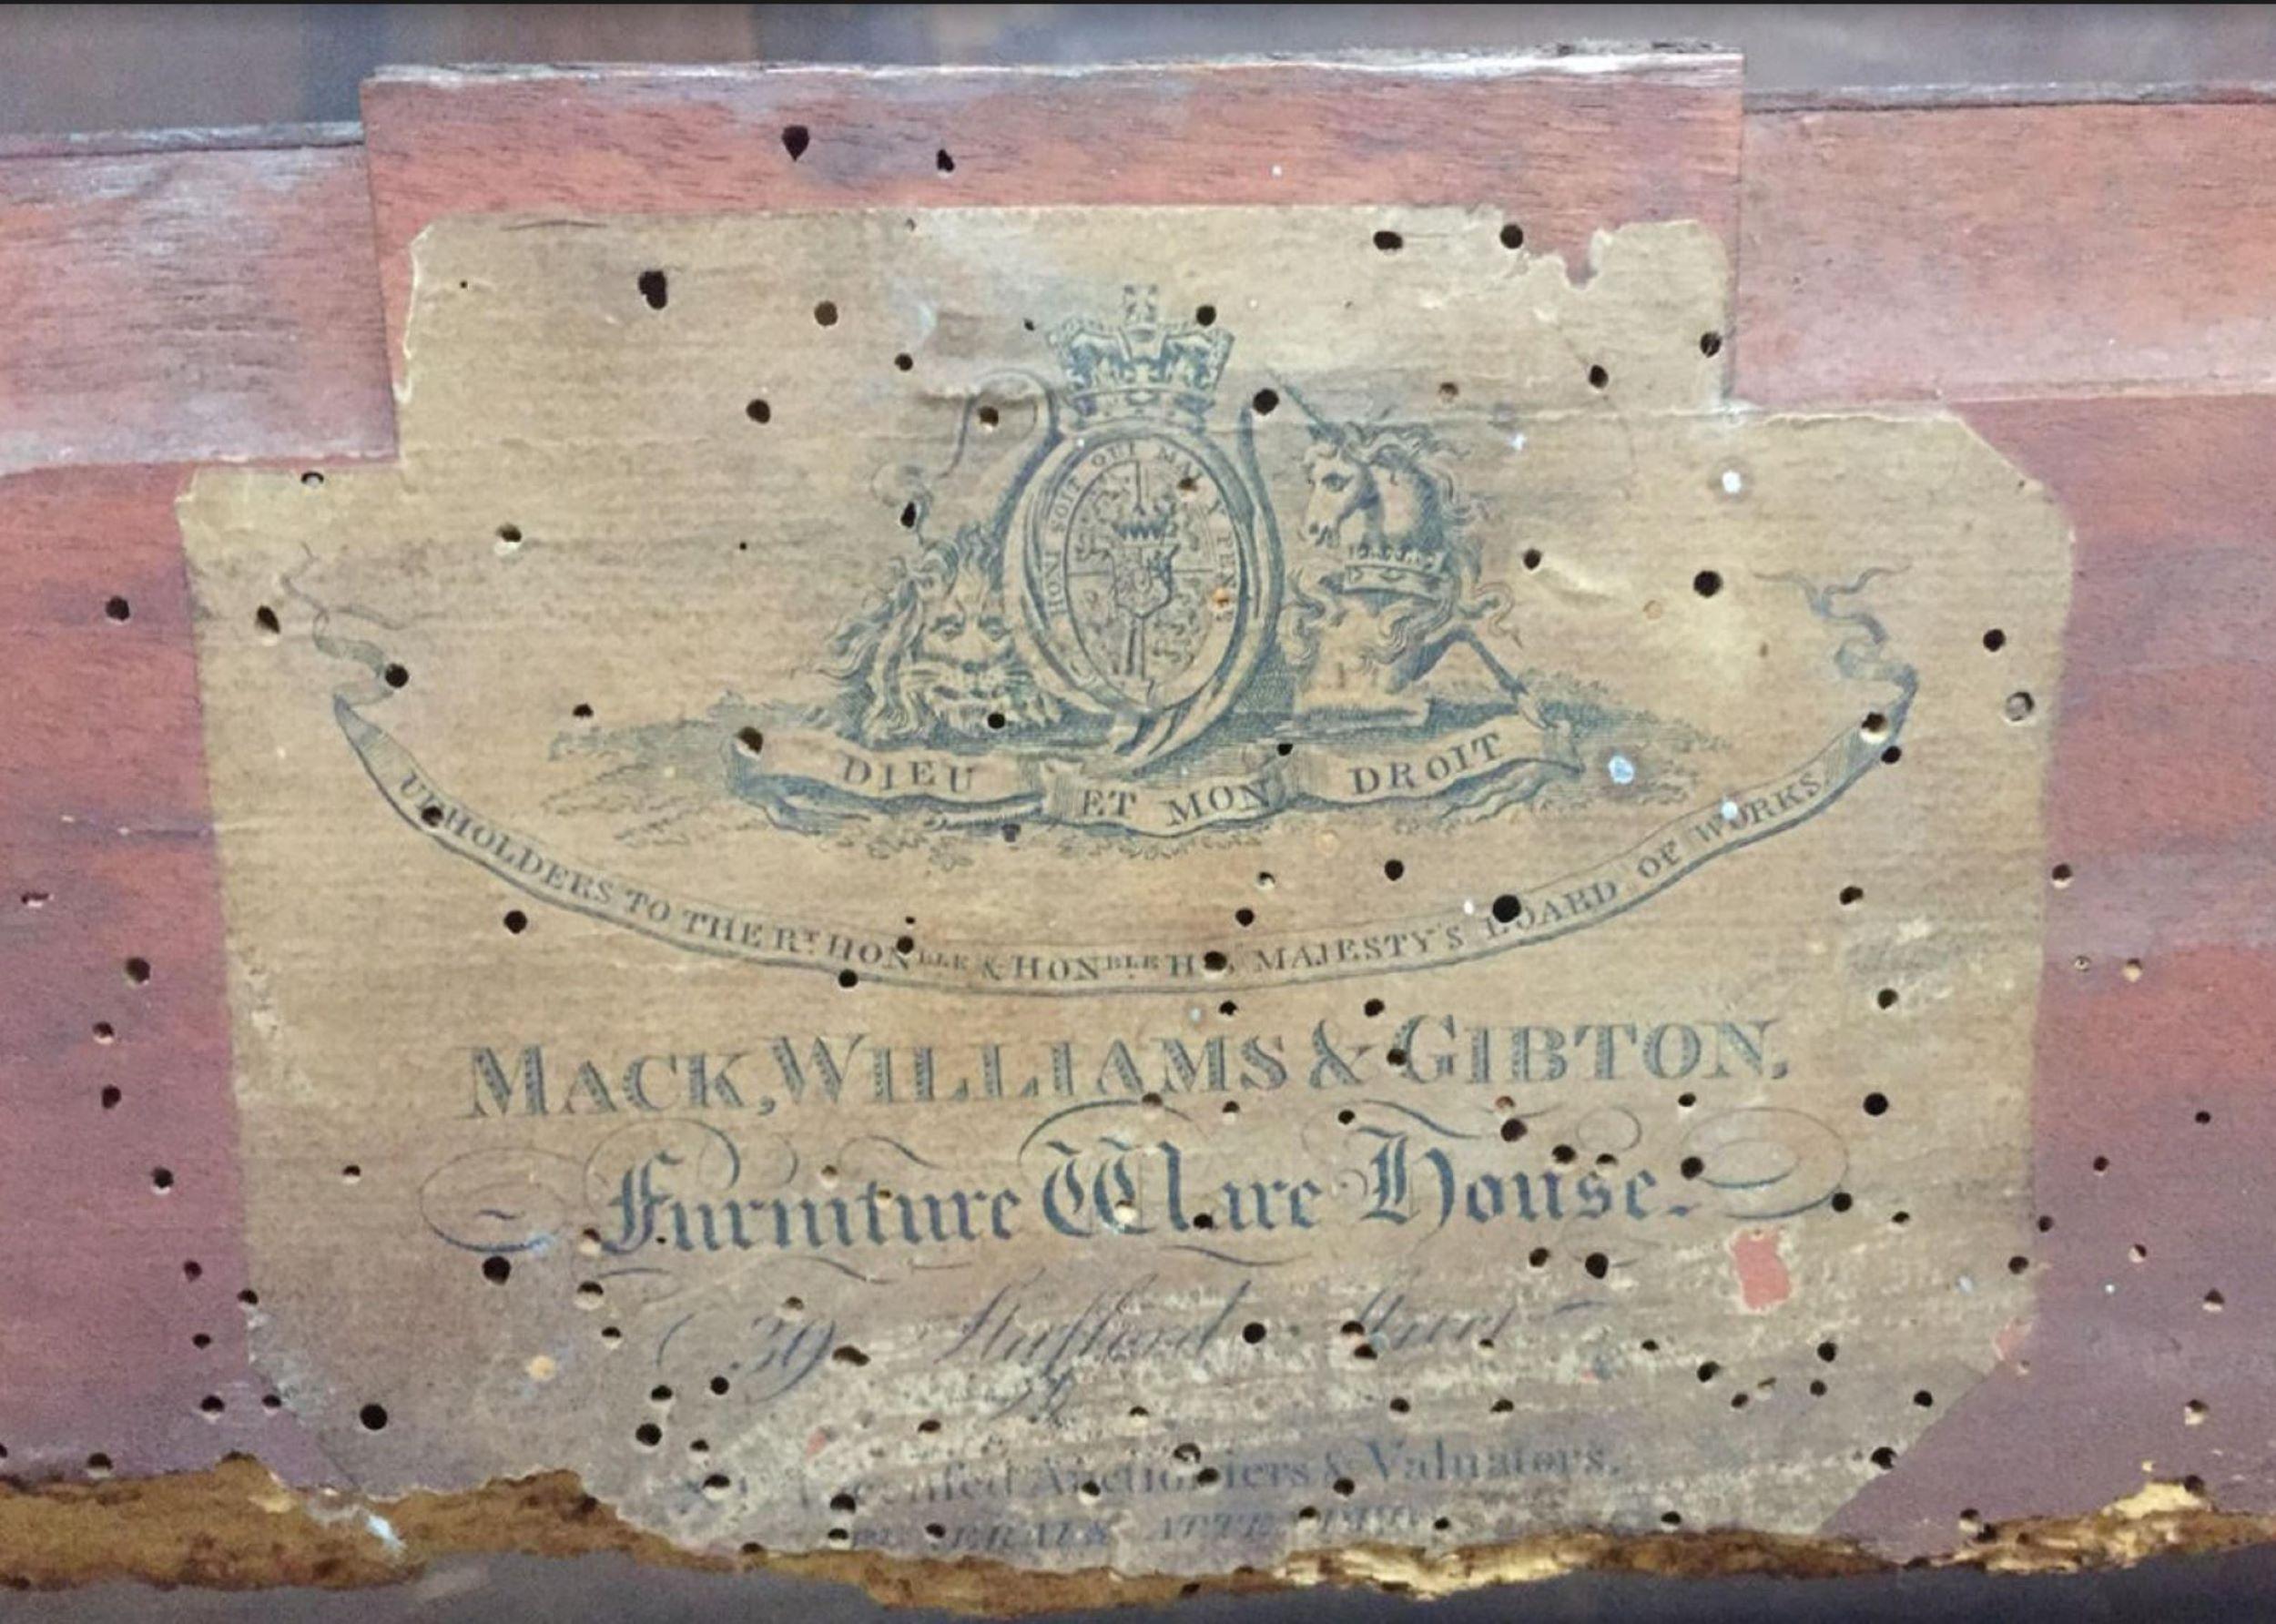 Made for the State visit of George IV in 1821 to Ireland after his coronation, by repute. By Mack, Williams and Gibton, Dublin, and with their label. Of French lit-en-bateau form, the frame carved with laurel leaves, Tudor rose paterae and lion